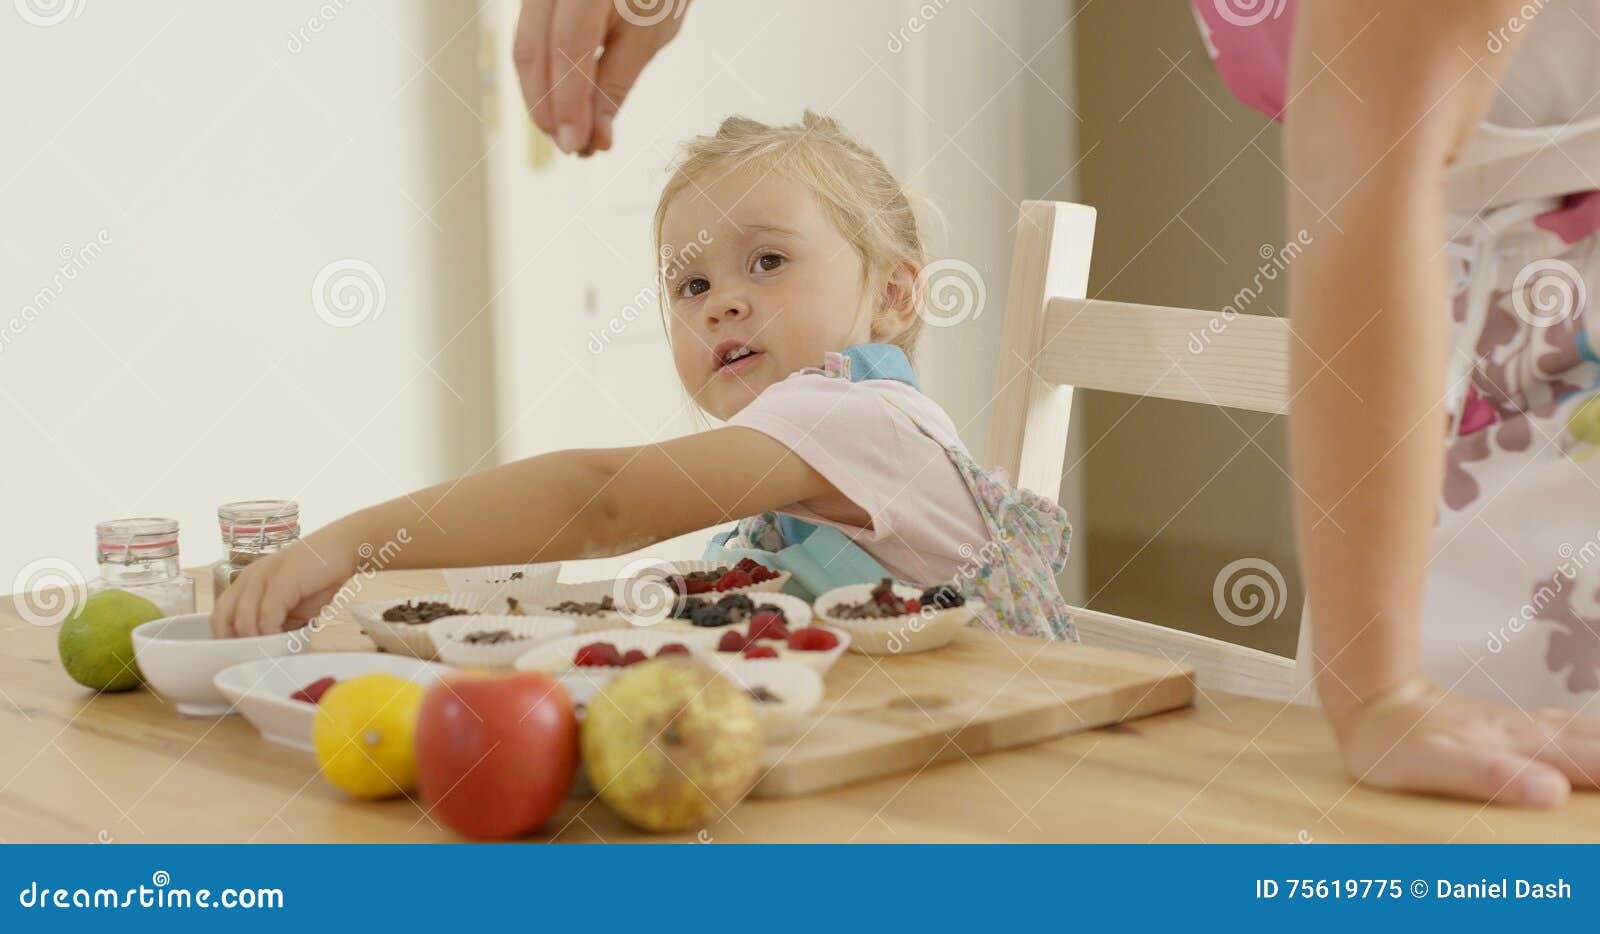 Child watching woman sprinkle candy on muffins. Cute blond female child watching woman leaning on table while sprinkling candy sprinkles on muffins to be baked